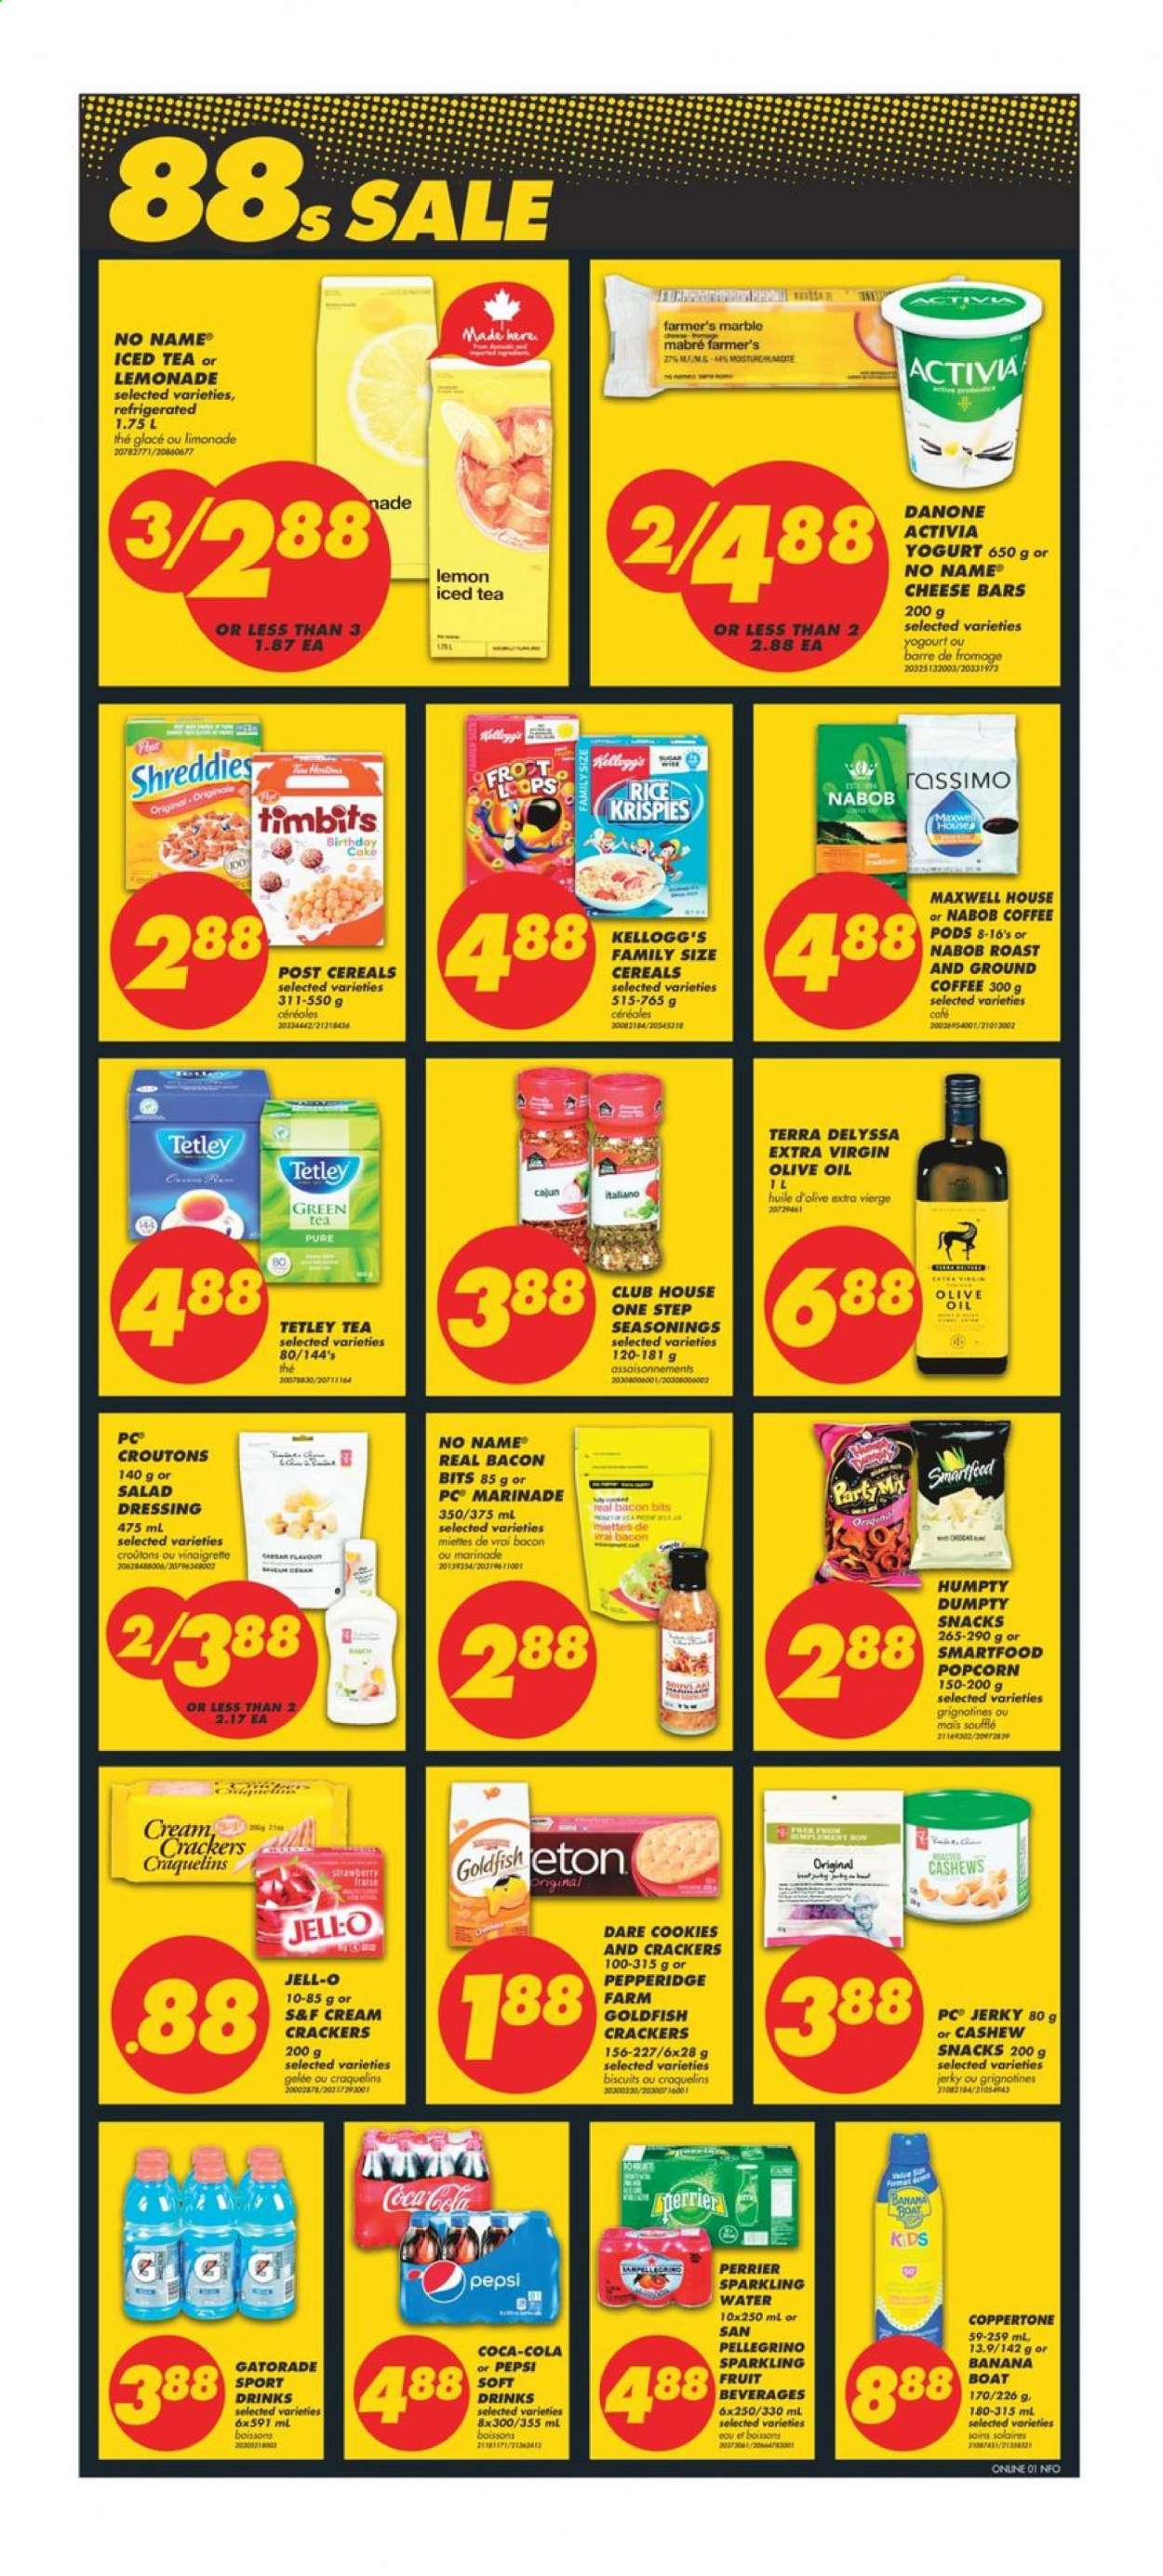 thumbnail - No Frills Flyer - June 24, 2021 - June 30, 2021 - Sales products - cake, No Name, jerky, yoghurt, Activia, cookies, snack, crackers, Kellogg's, biscuit, Smartfood, Goldfish, croutons, sugar, Jell-O, bacon bits, cereals, Rice Krispies, vinaigrette dressing, dressing, marinade, extra virgin olive oil, olive oil, oil, cashews, Coca-Cola, lemonade, Pepsi, ice tea, soft drink, Perrier, Gatorade, sparkling water, San Pellegrino, green tea, Maxwell House, coffee pods, Danone. Page 6.